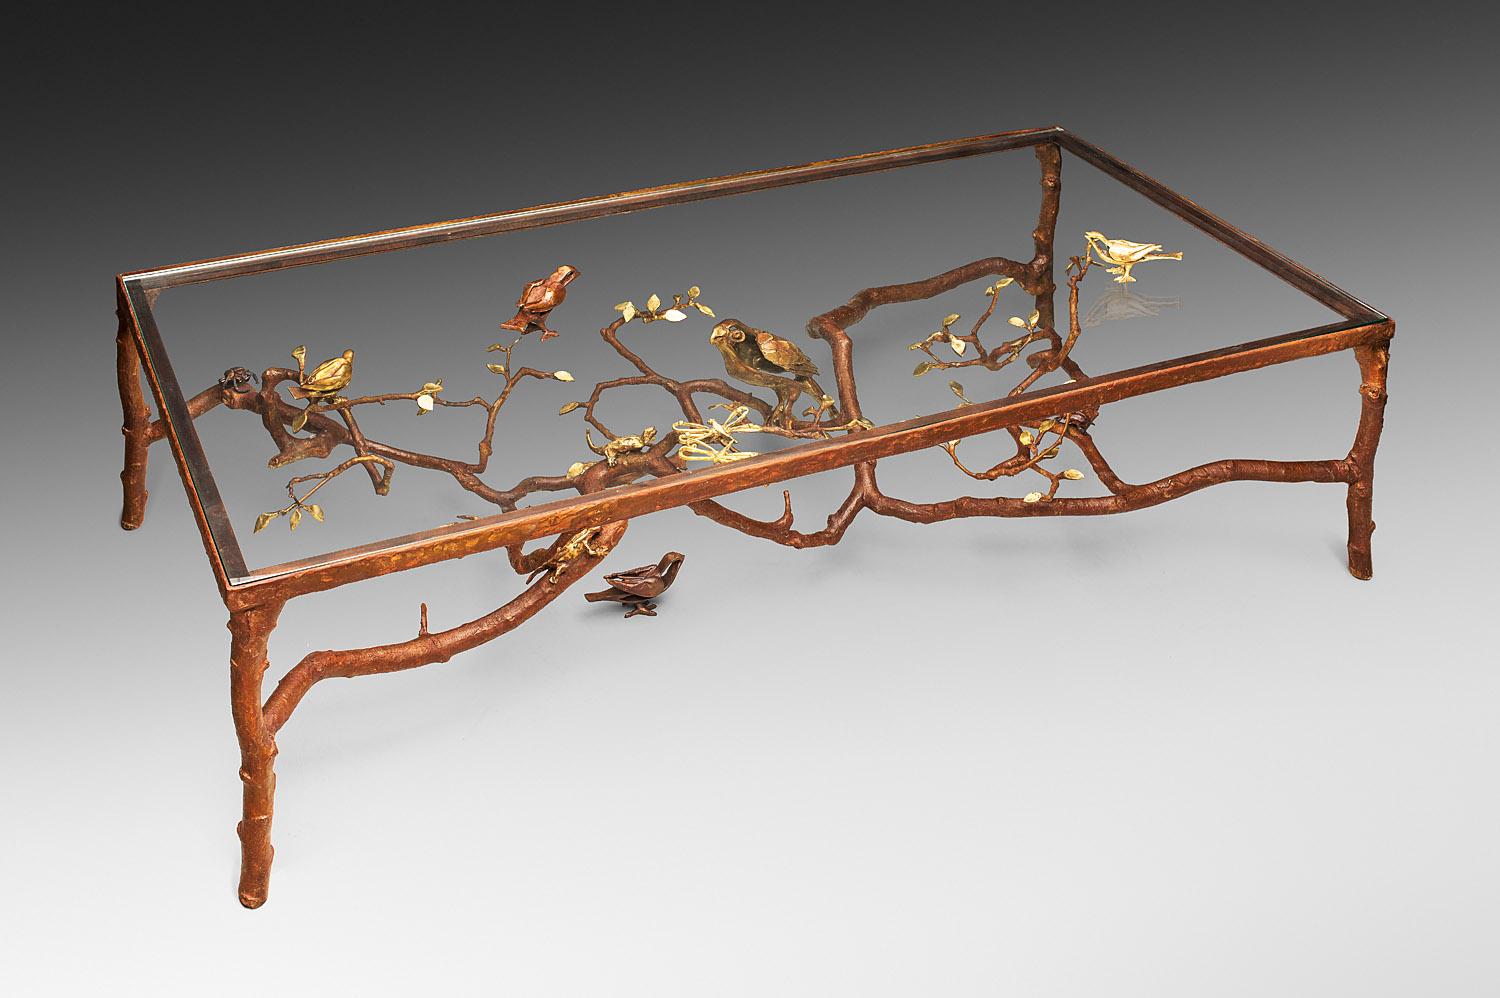 Paula Swinnen 2012, Unique table with parrot , bronze , patina gold and brown,
 177 x 86 cm, height 47 cm, 
One parrot, one bird, two lizards, two beetles, two dragonflies
Unique piece.
Signed.
Exhibited in 2012
Mai 